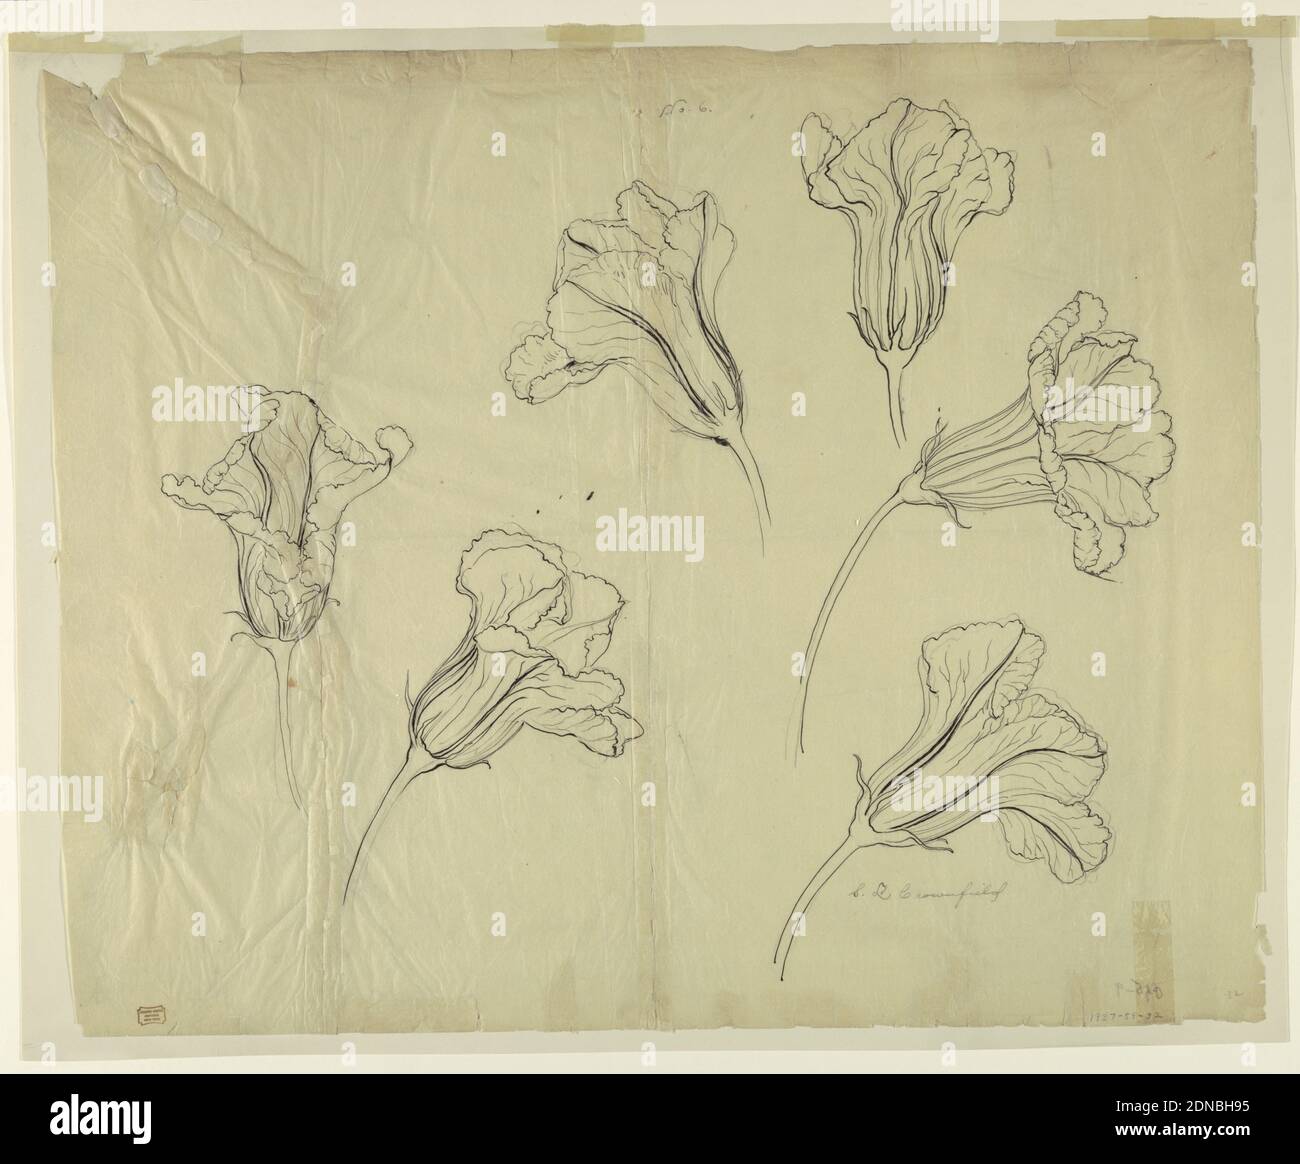 Studies of Squash or Pumpkin Blossoms, Sophia L. Crownfield, (American, 1862–1929), Graphite, pen and ink on tracing paper laid down, Horizontal sheet illustrating six studies of squash or pumpkin blossoms., USA, early 20th century, nature studies, Drawing Stock Photo